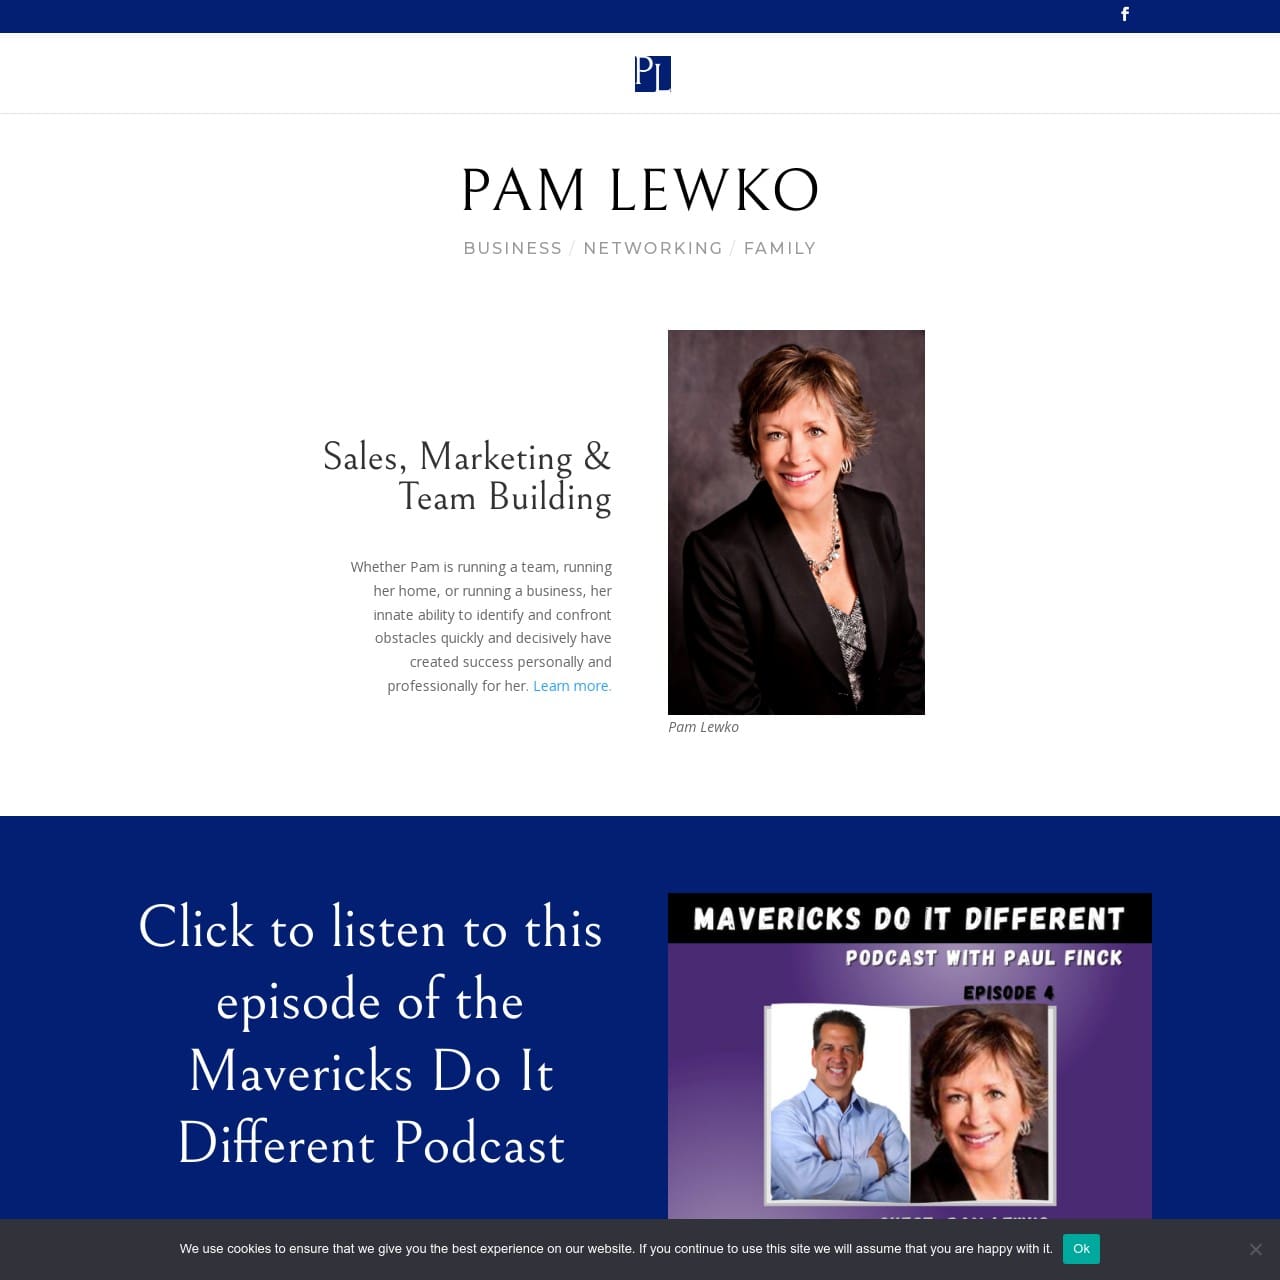 Discover the vibrant world of Pam Lewko, a multifaceted individual who embodies the spirit of a hip Nana, cooking enthusiast, and compassionate samurai. Witness her journey as a professional network marketer, where relationships, team building, and empowering others take center stage.